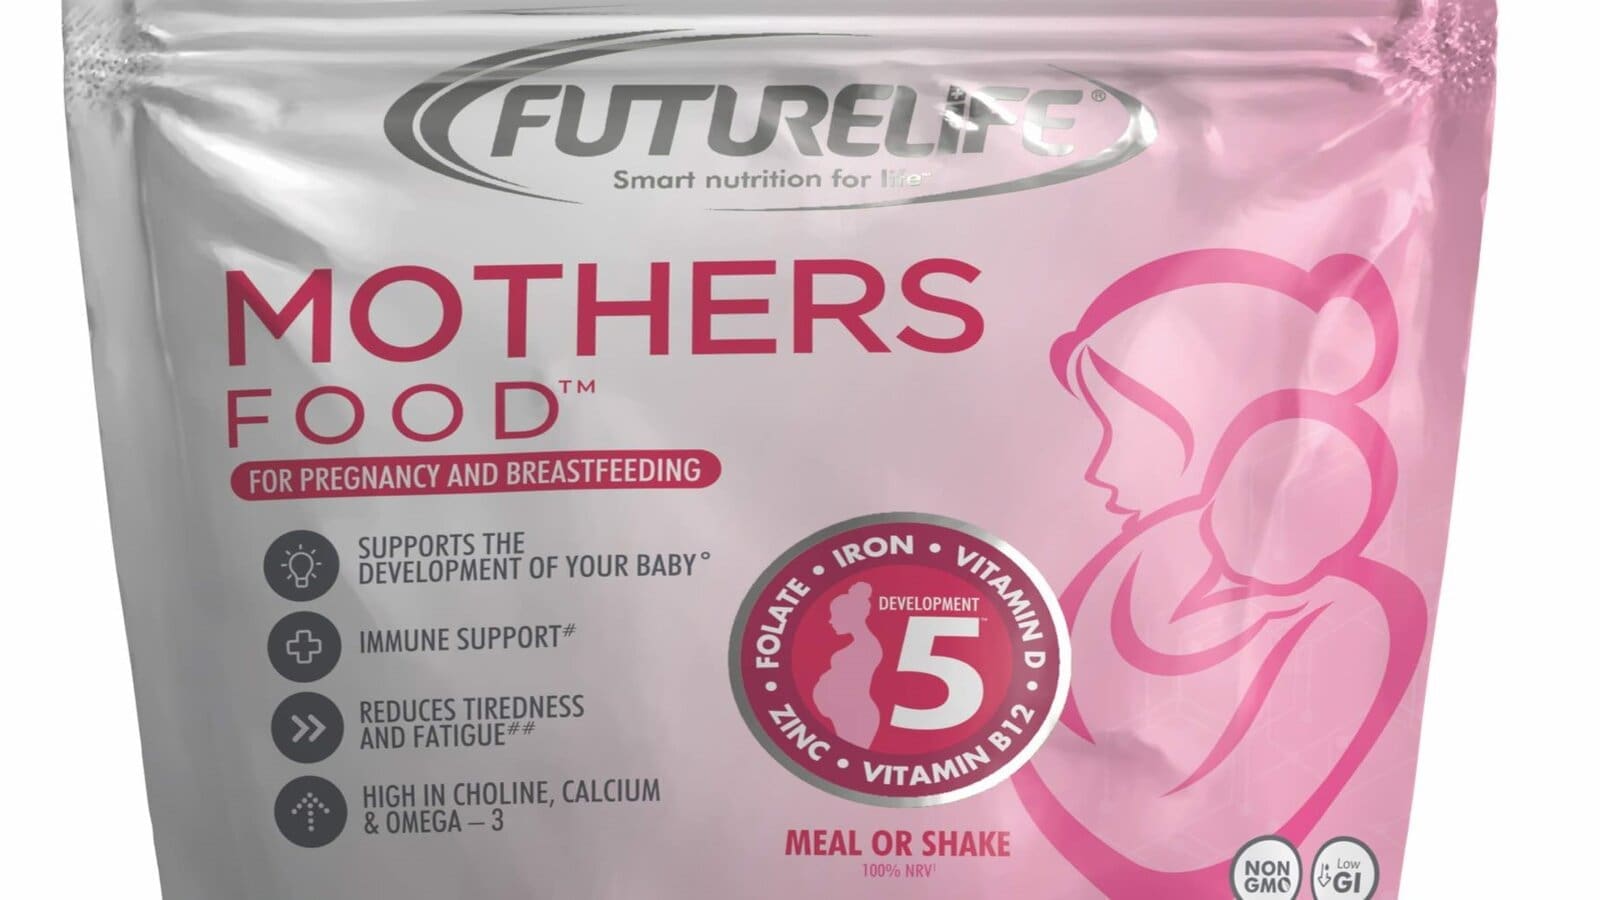 Futurelife debut ‘Futurelife Mothers’ to provide optimal nutrition for expectant, lactating moms